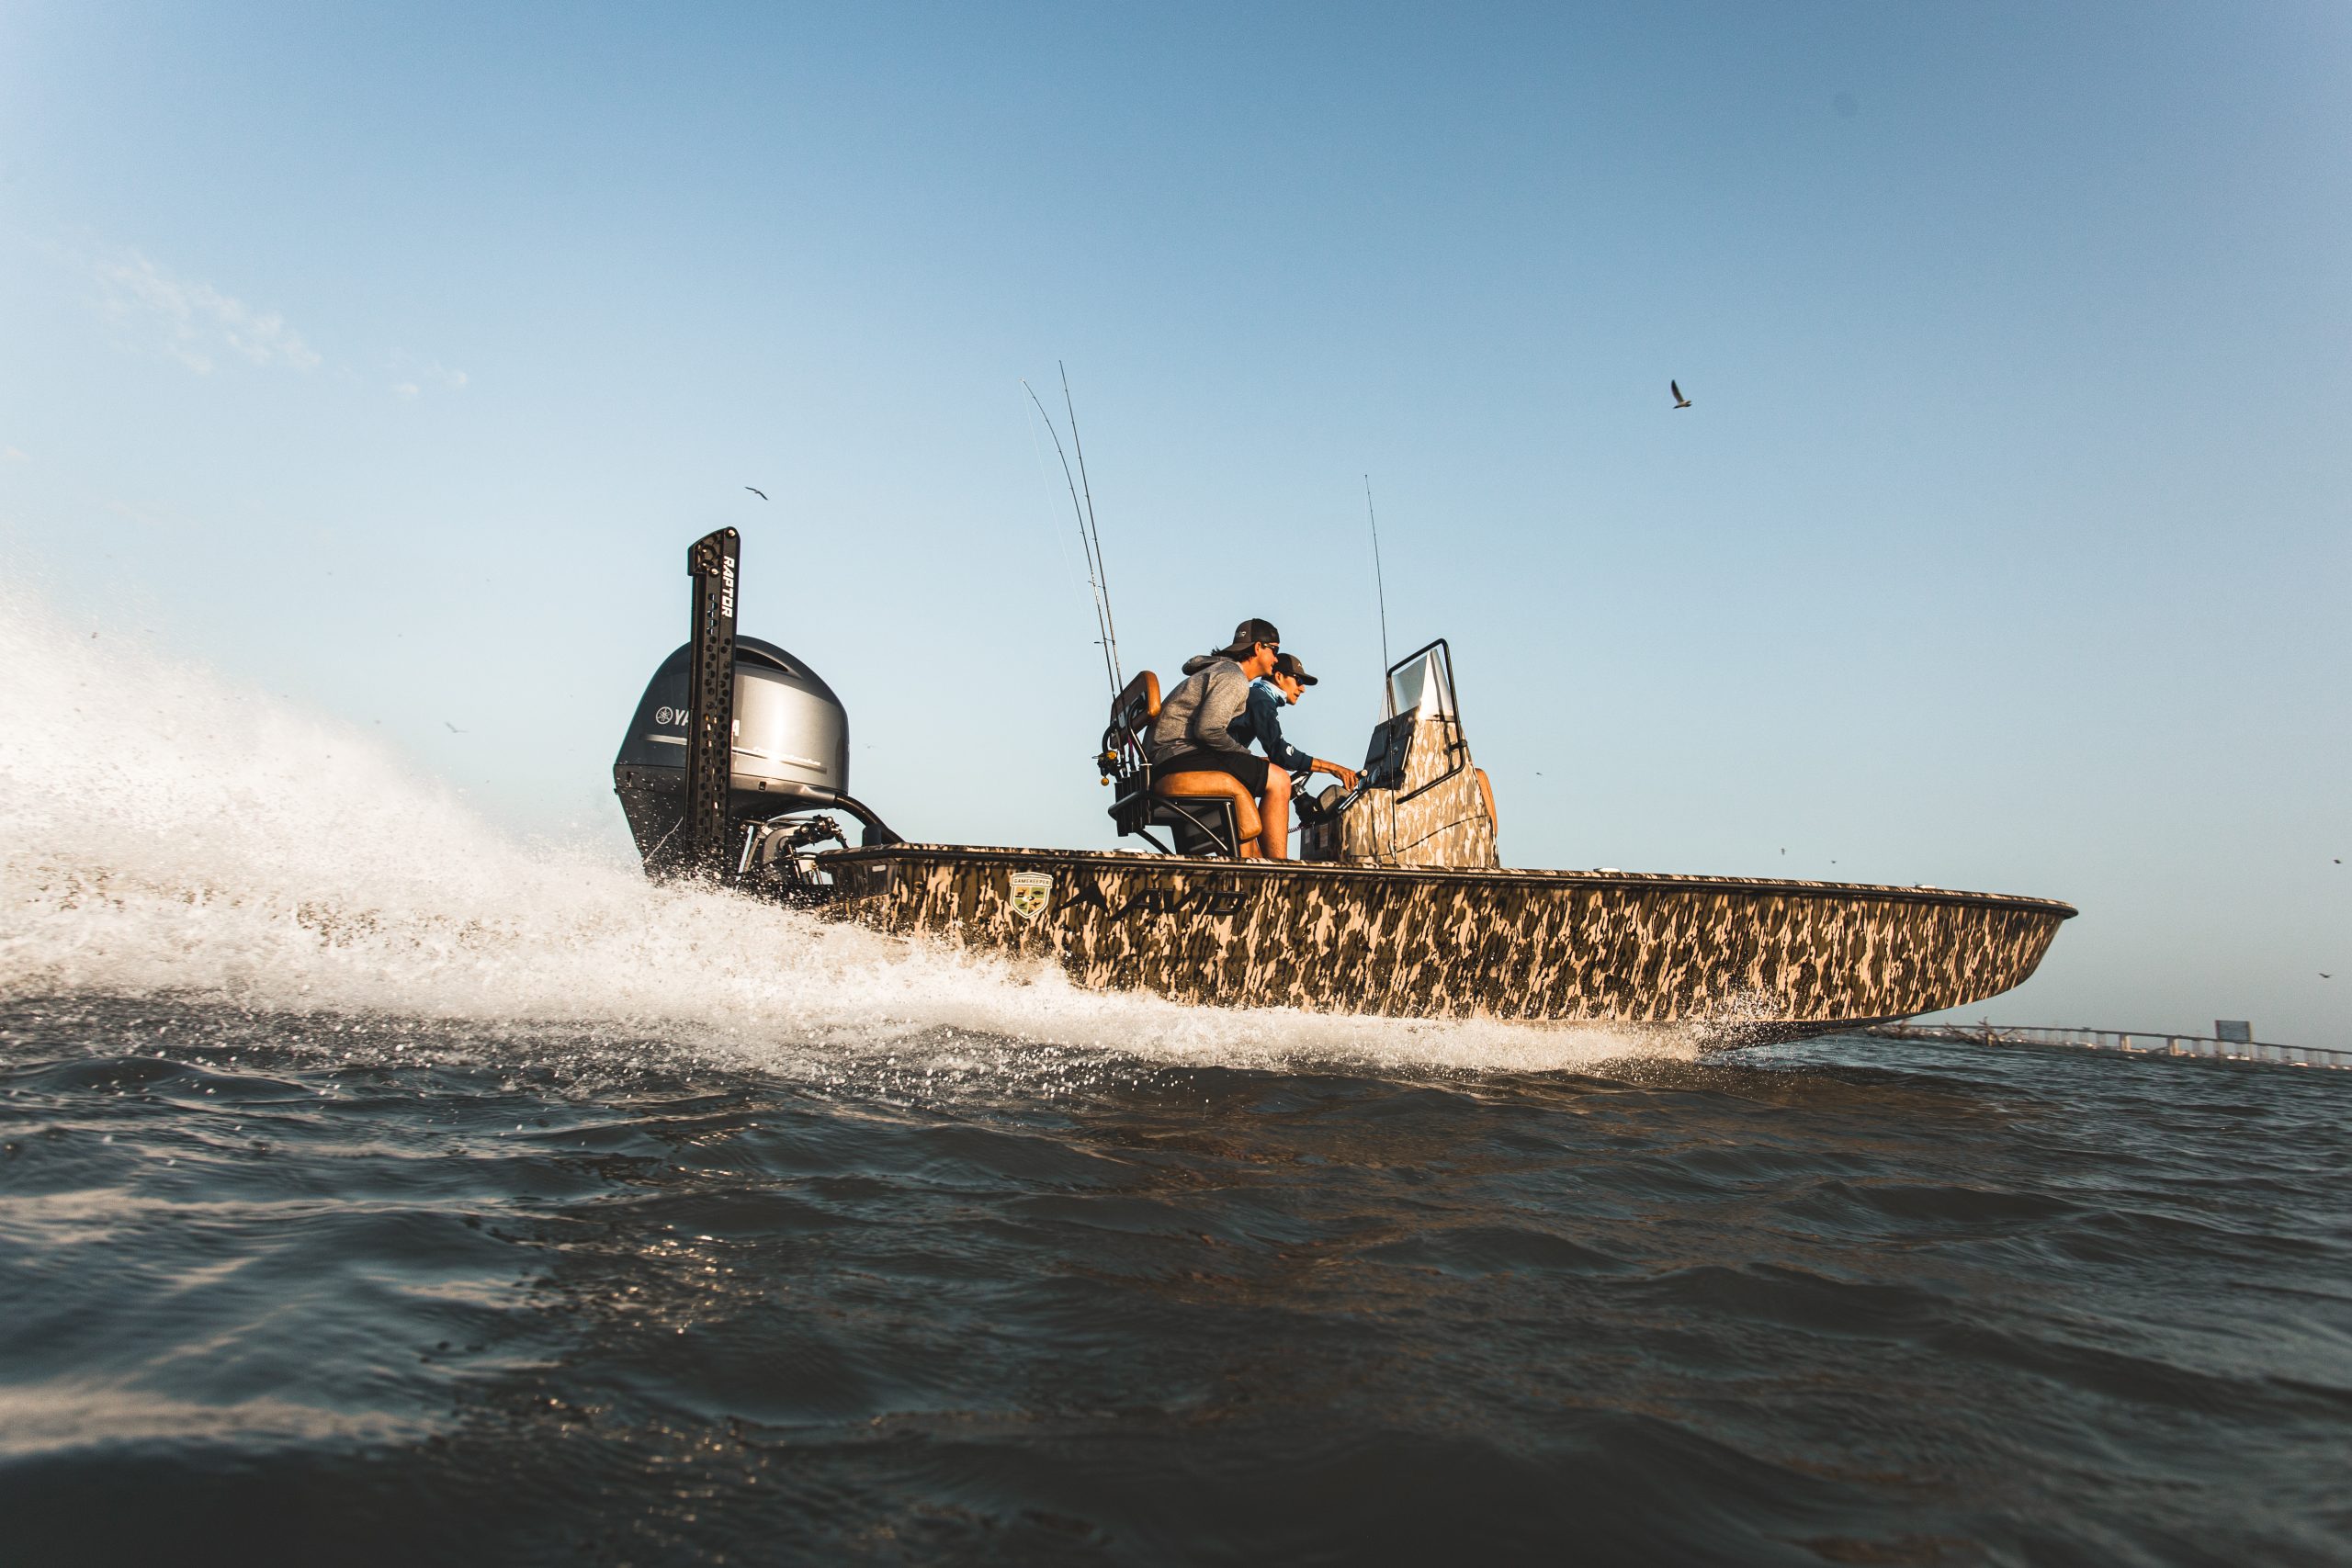 Avid Boats 21FST, trout, The 21FST Gamekeeper has entered the chat.  #tunnelhull Check out www.avid-boats.com for more info. . . #avidboats  #aluminumboat #aluminumboats